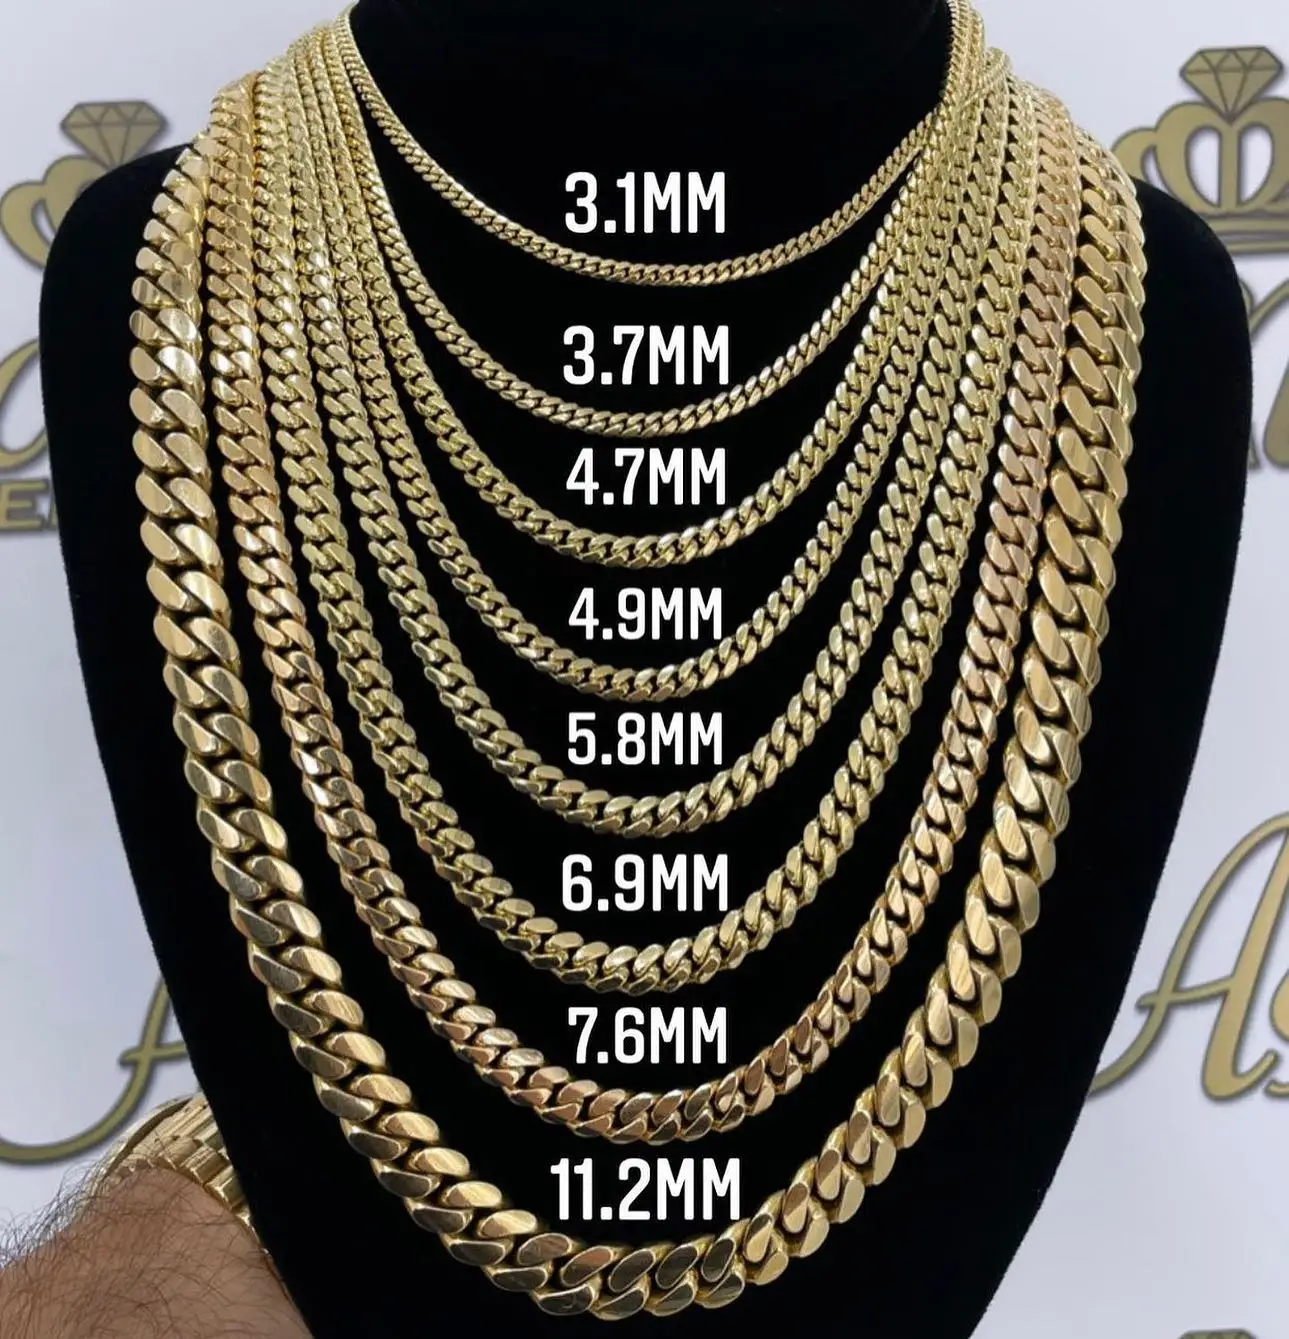 Sbca2d1eff18b4c11b86e0463f6a23e61B 14mm 20inches MoissaniteCuban Chain 925 Silver Chain DEF VVS1 Iced Out Moissanite Watch Hip Pop Jewelry Loose Gemstones Factory